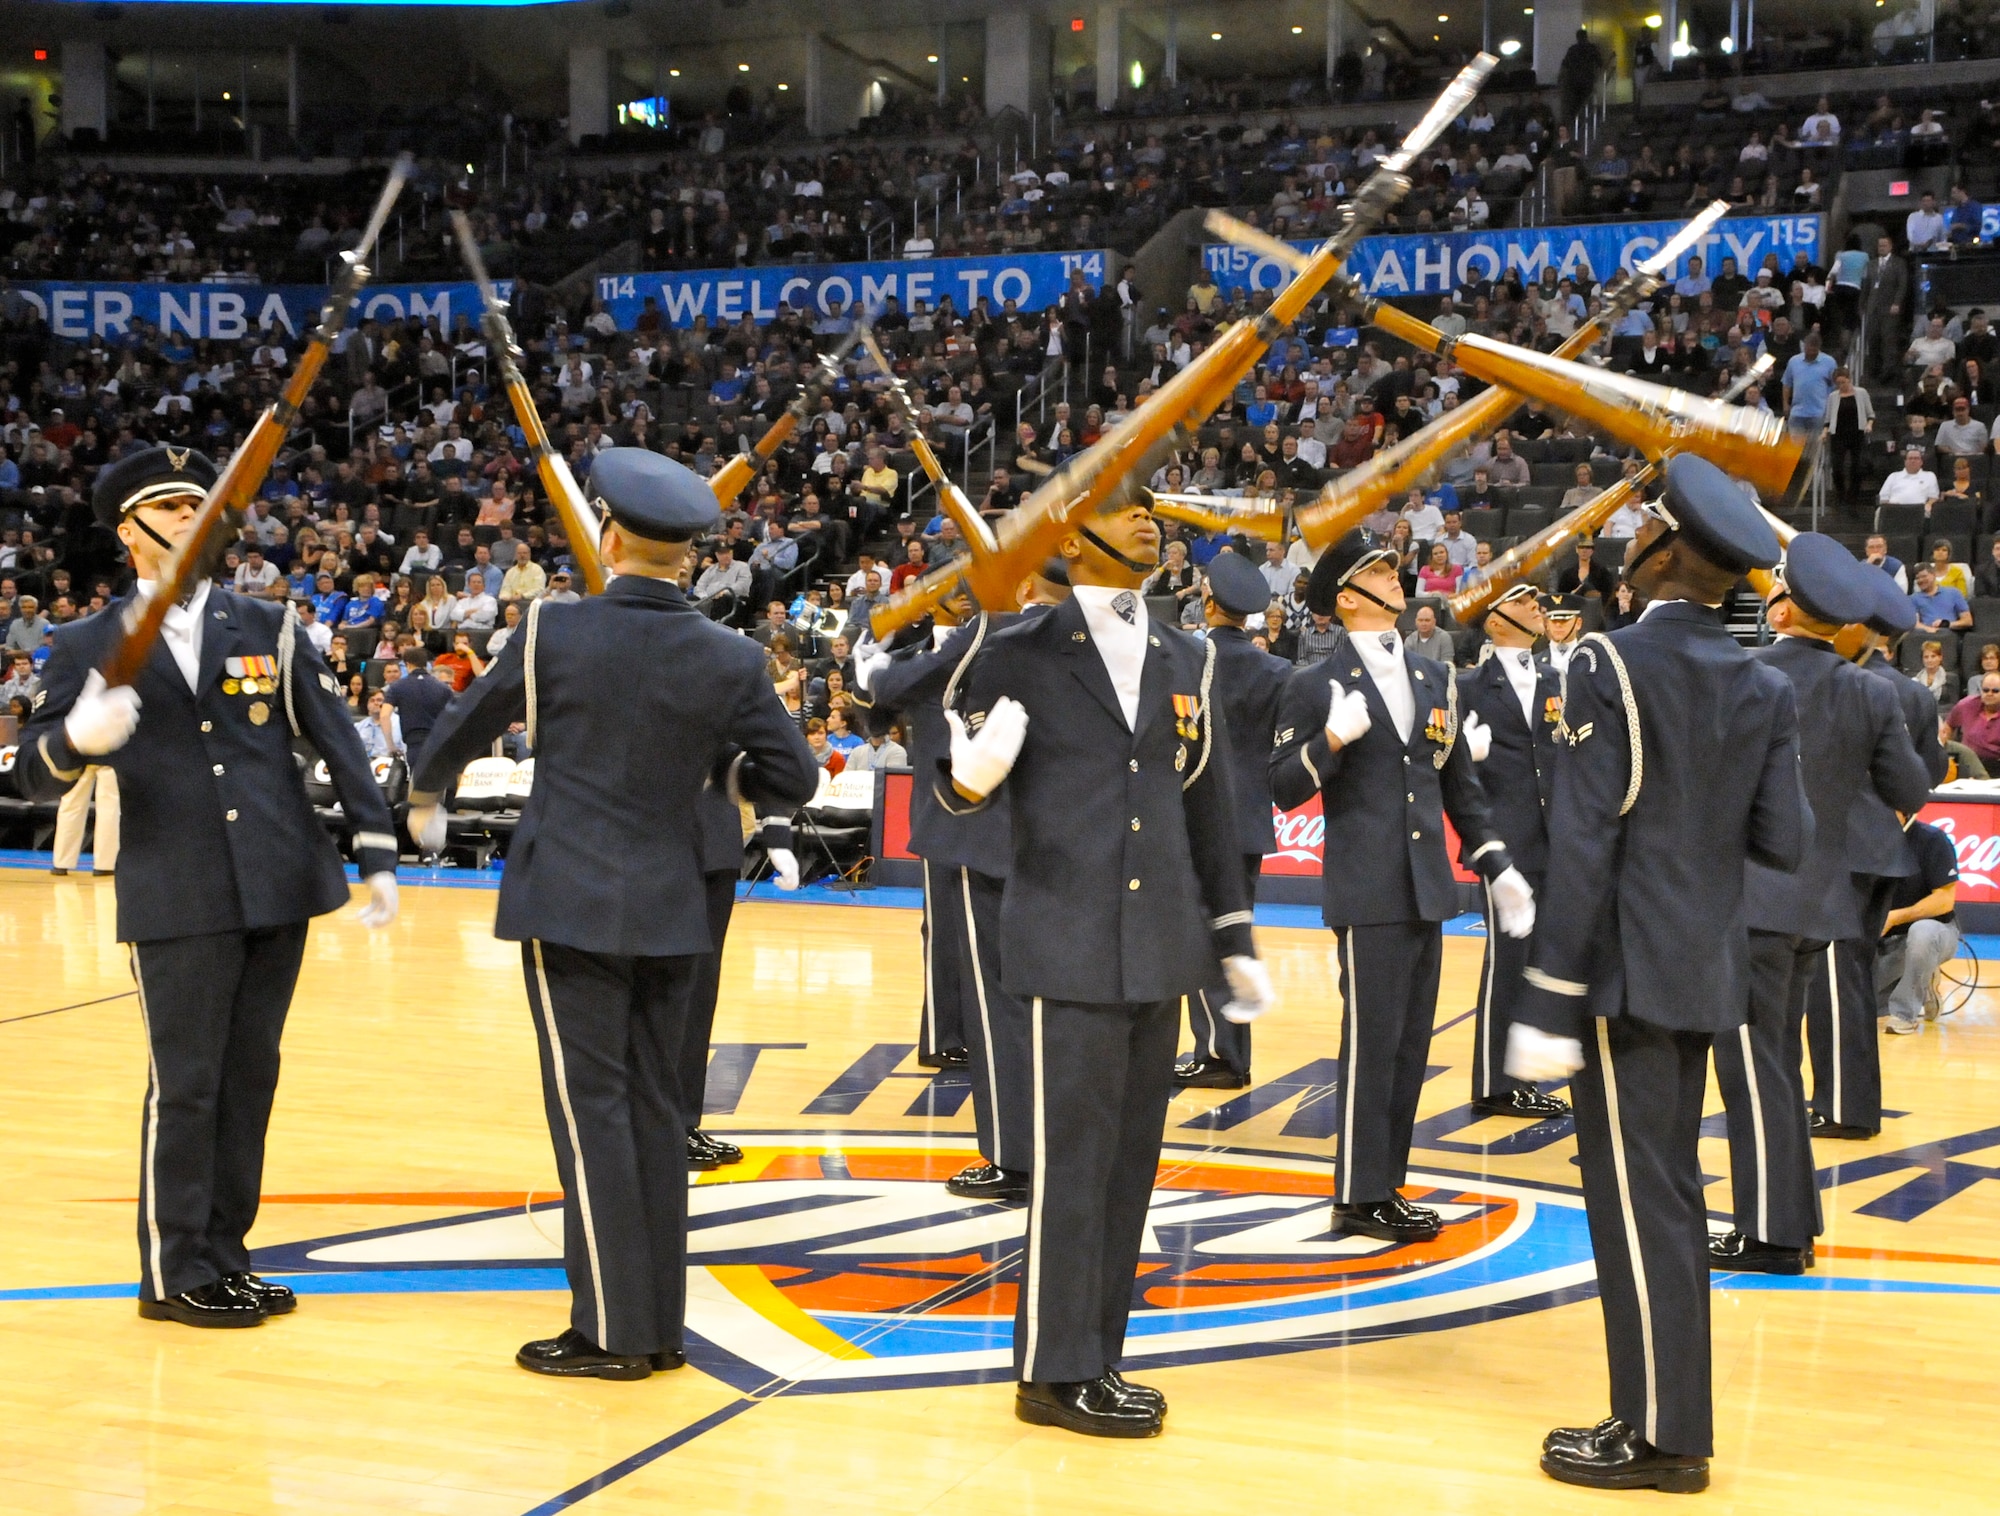 The U.S. Air Force Honor Guard drill team performs the halftime show Feb. 15 on the Oklahoma City Thunder court for military appreciation night. The drill team performs to represent the Airmen serving around the world. (U.S. Air Force photo by Airman 1st Class Tabitha N. Haynes)